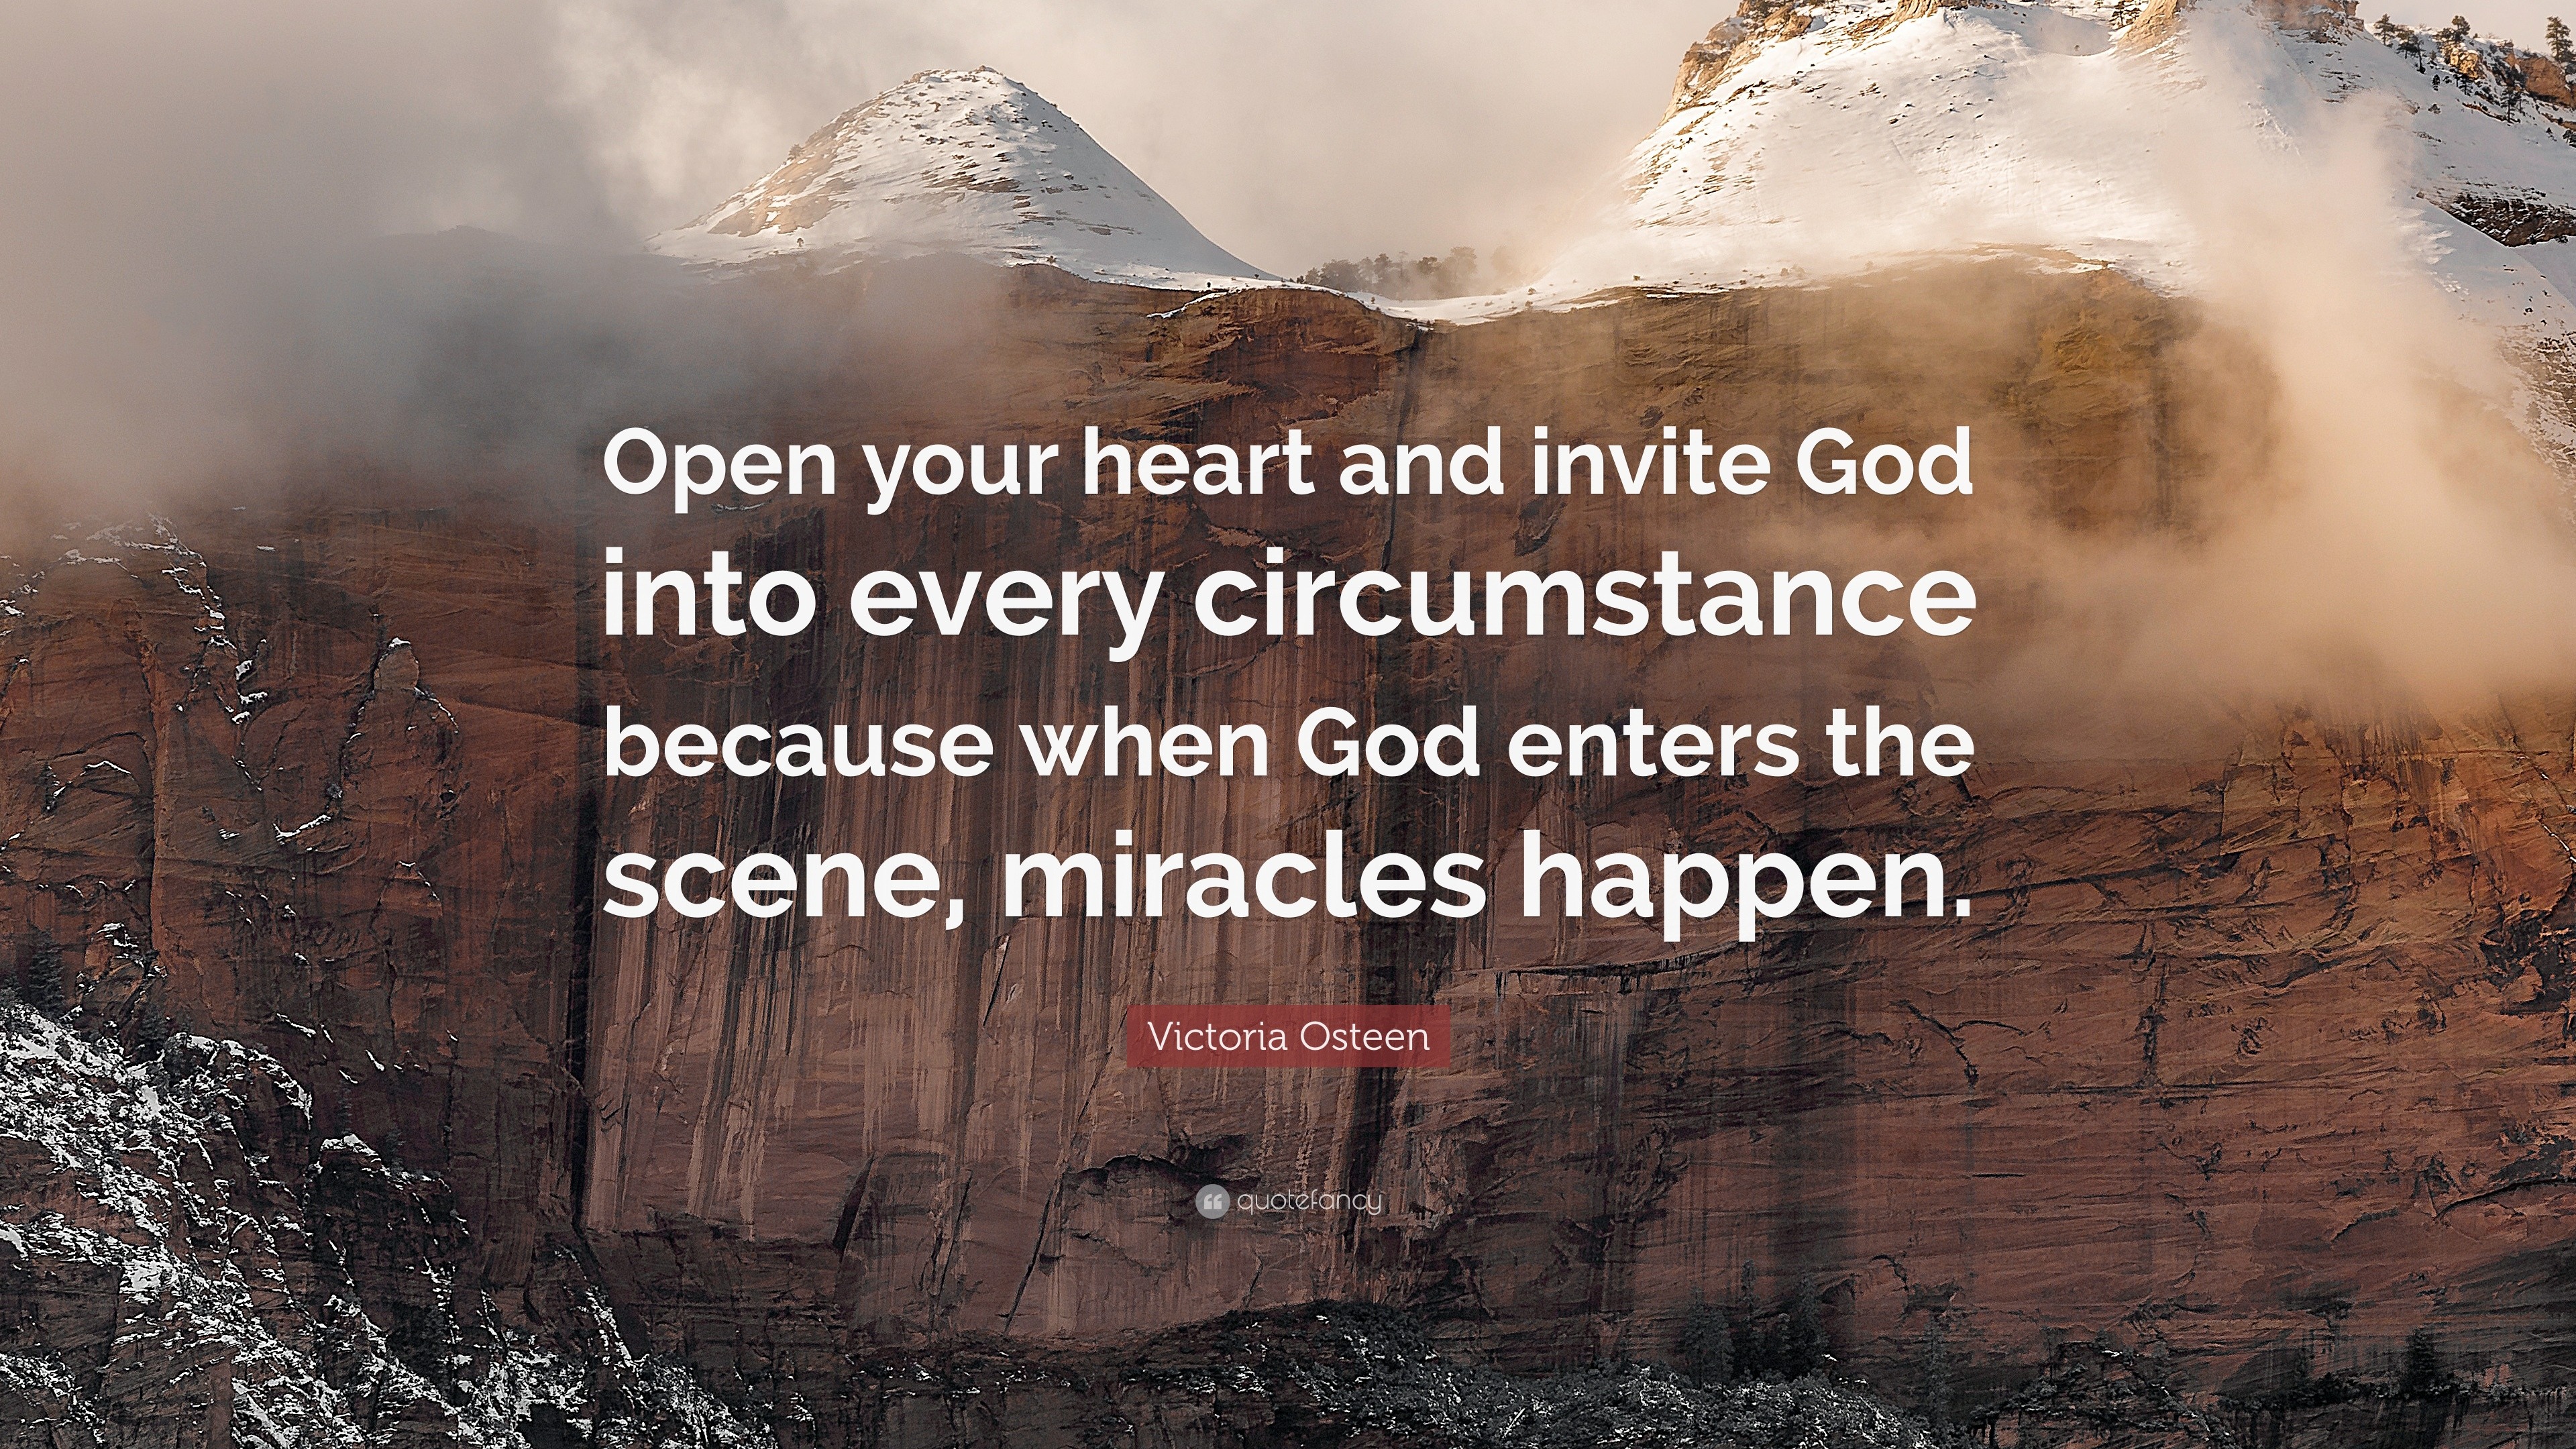 Victoria Osteen Quote “Open your heart and invite God into every circumstance because when